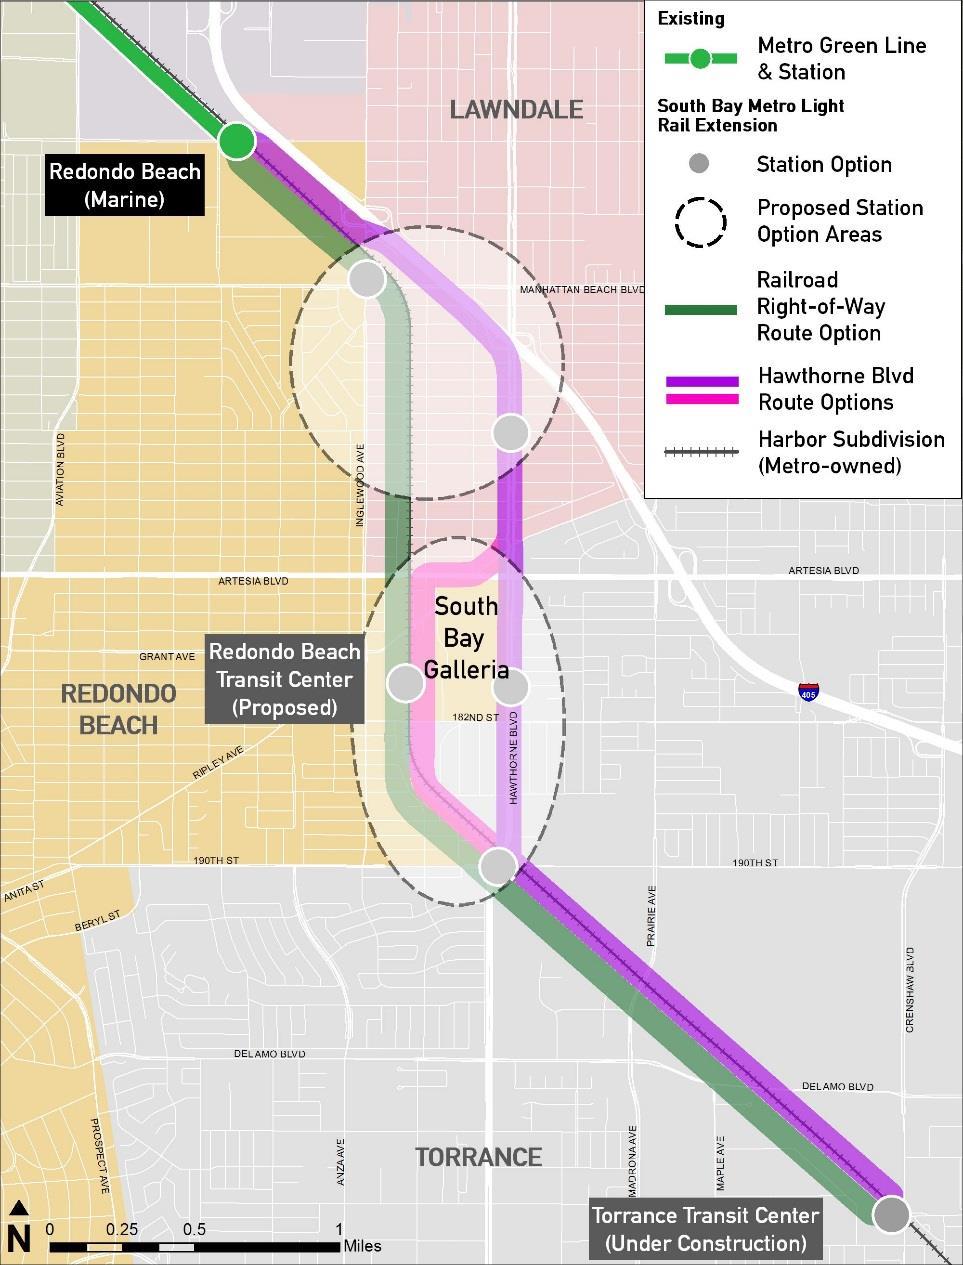 Station Options 15 Based on route options & initial city staff input, potential station options in each city: Lawndale: Inglewood/Manhattan Beach area Hawthorne/166 th